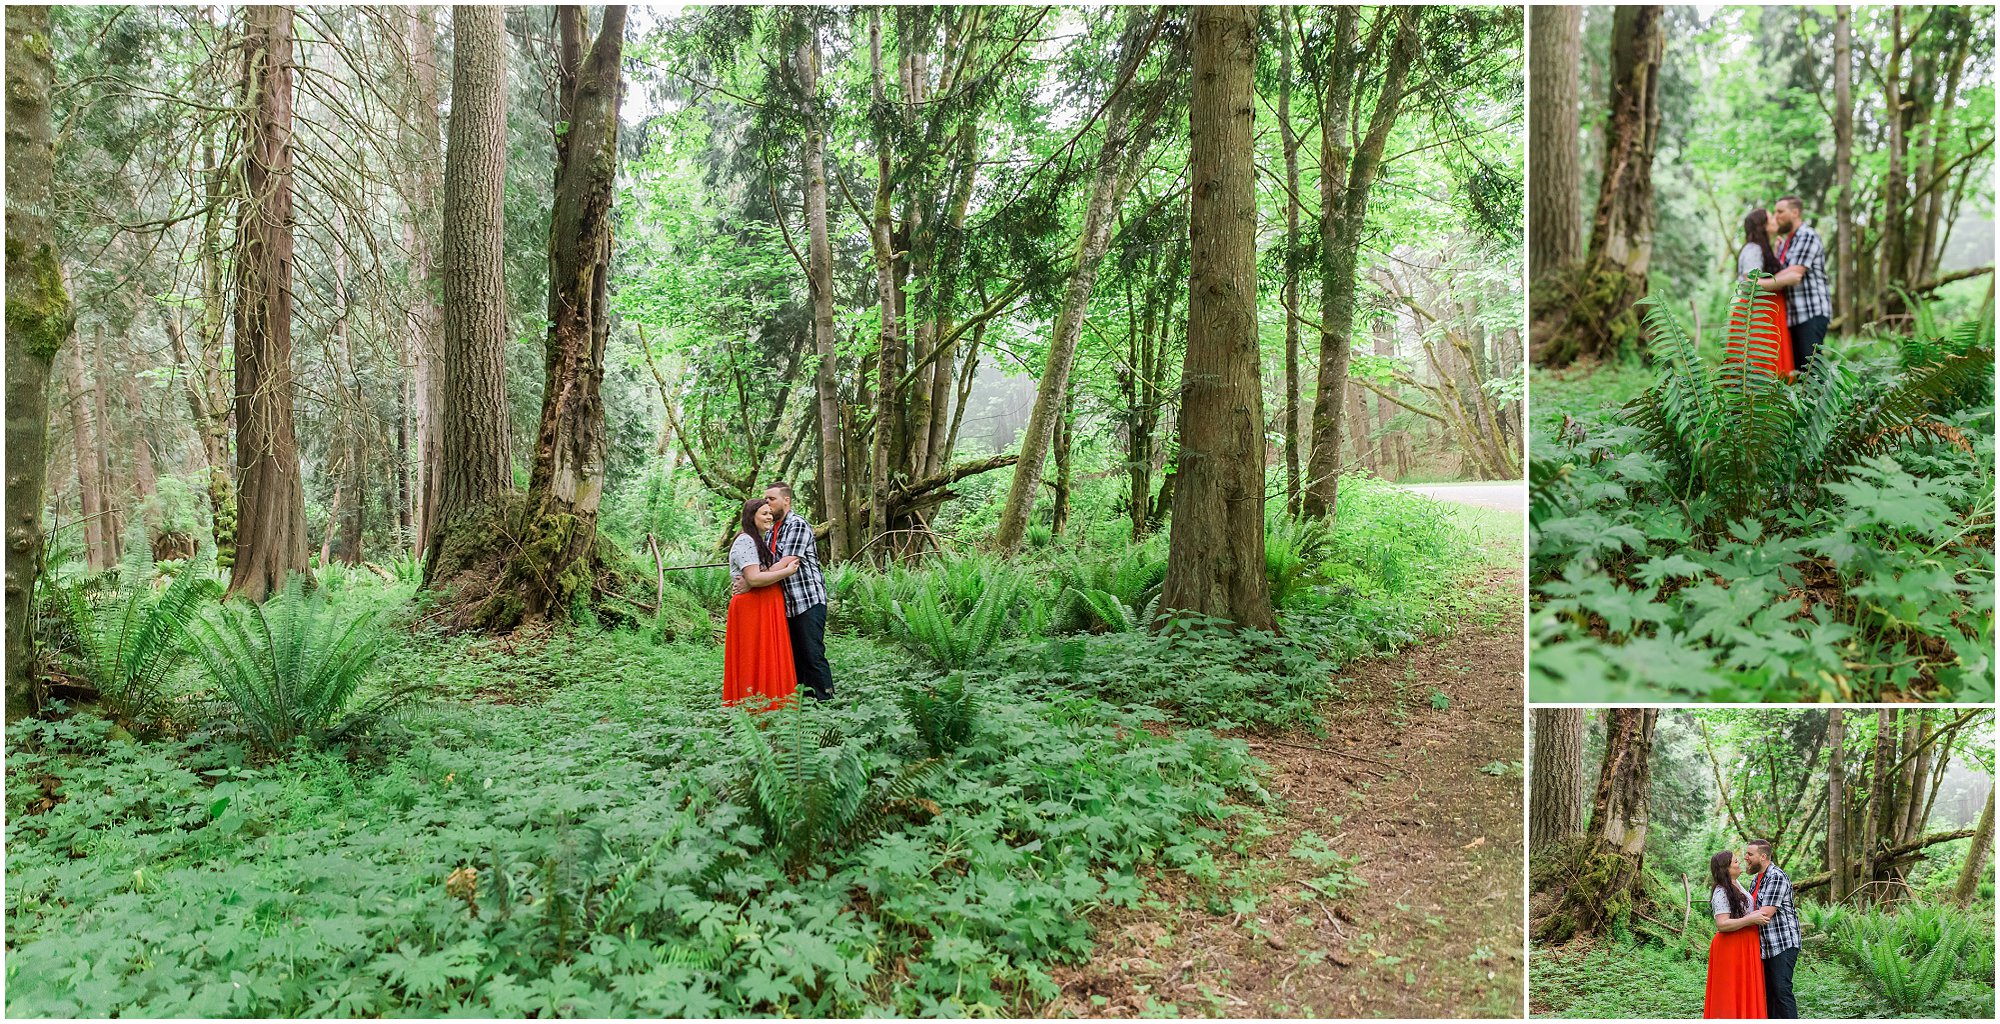 The Olympic Peninsula and it's mossy green forests are the perfect place for an engagement photo session. | Erica Swantek Photography